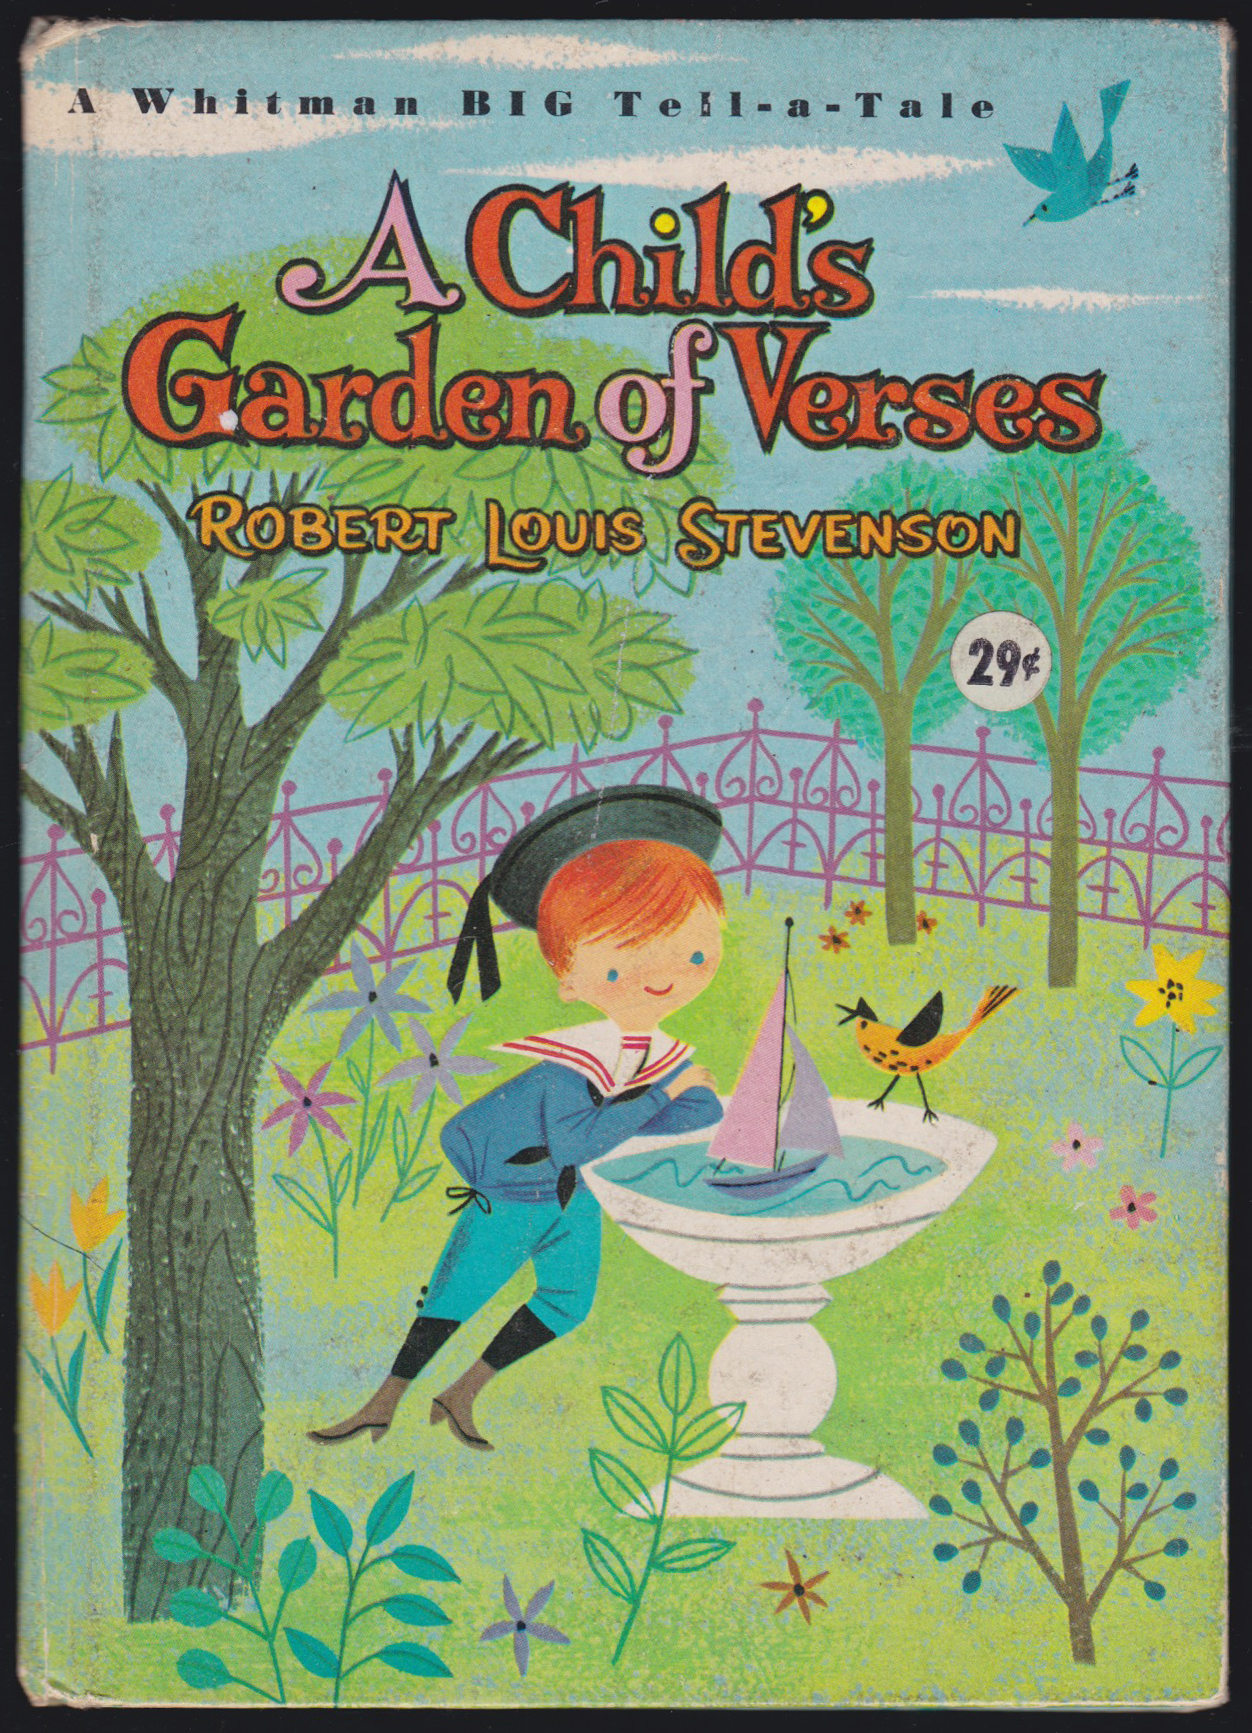 A Child's Garden of Verses (A Whitman BIG Tell-a-Tale. No. 2408